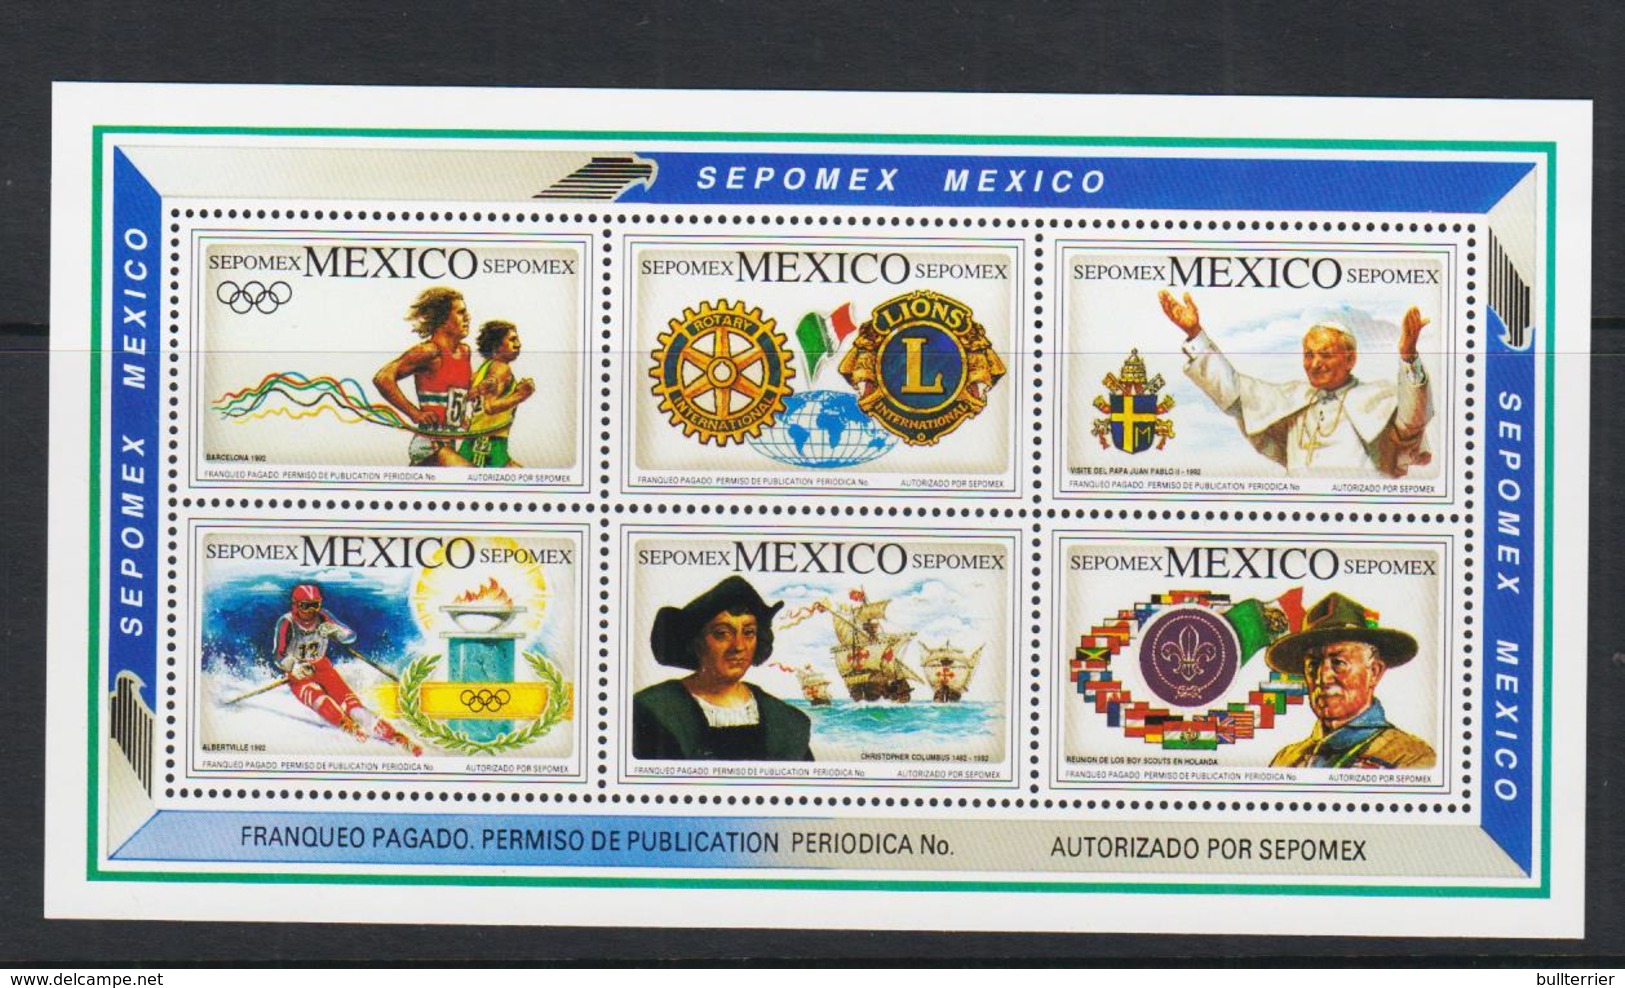 MEXICO  -SEPOMEX / LIONS/SCOUTS/ OLYMPICS/POPE  SHEETLET OF 6 MINT NEVER HINGED - Mexico